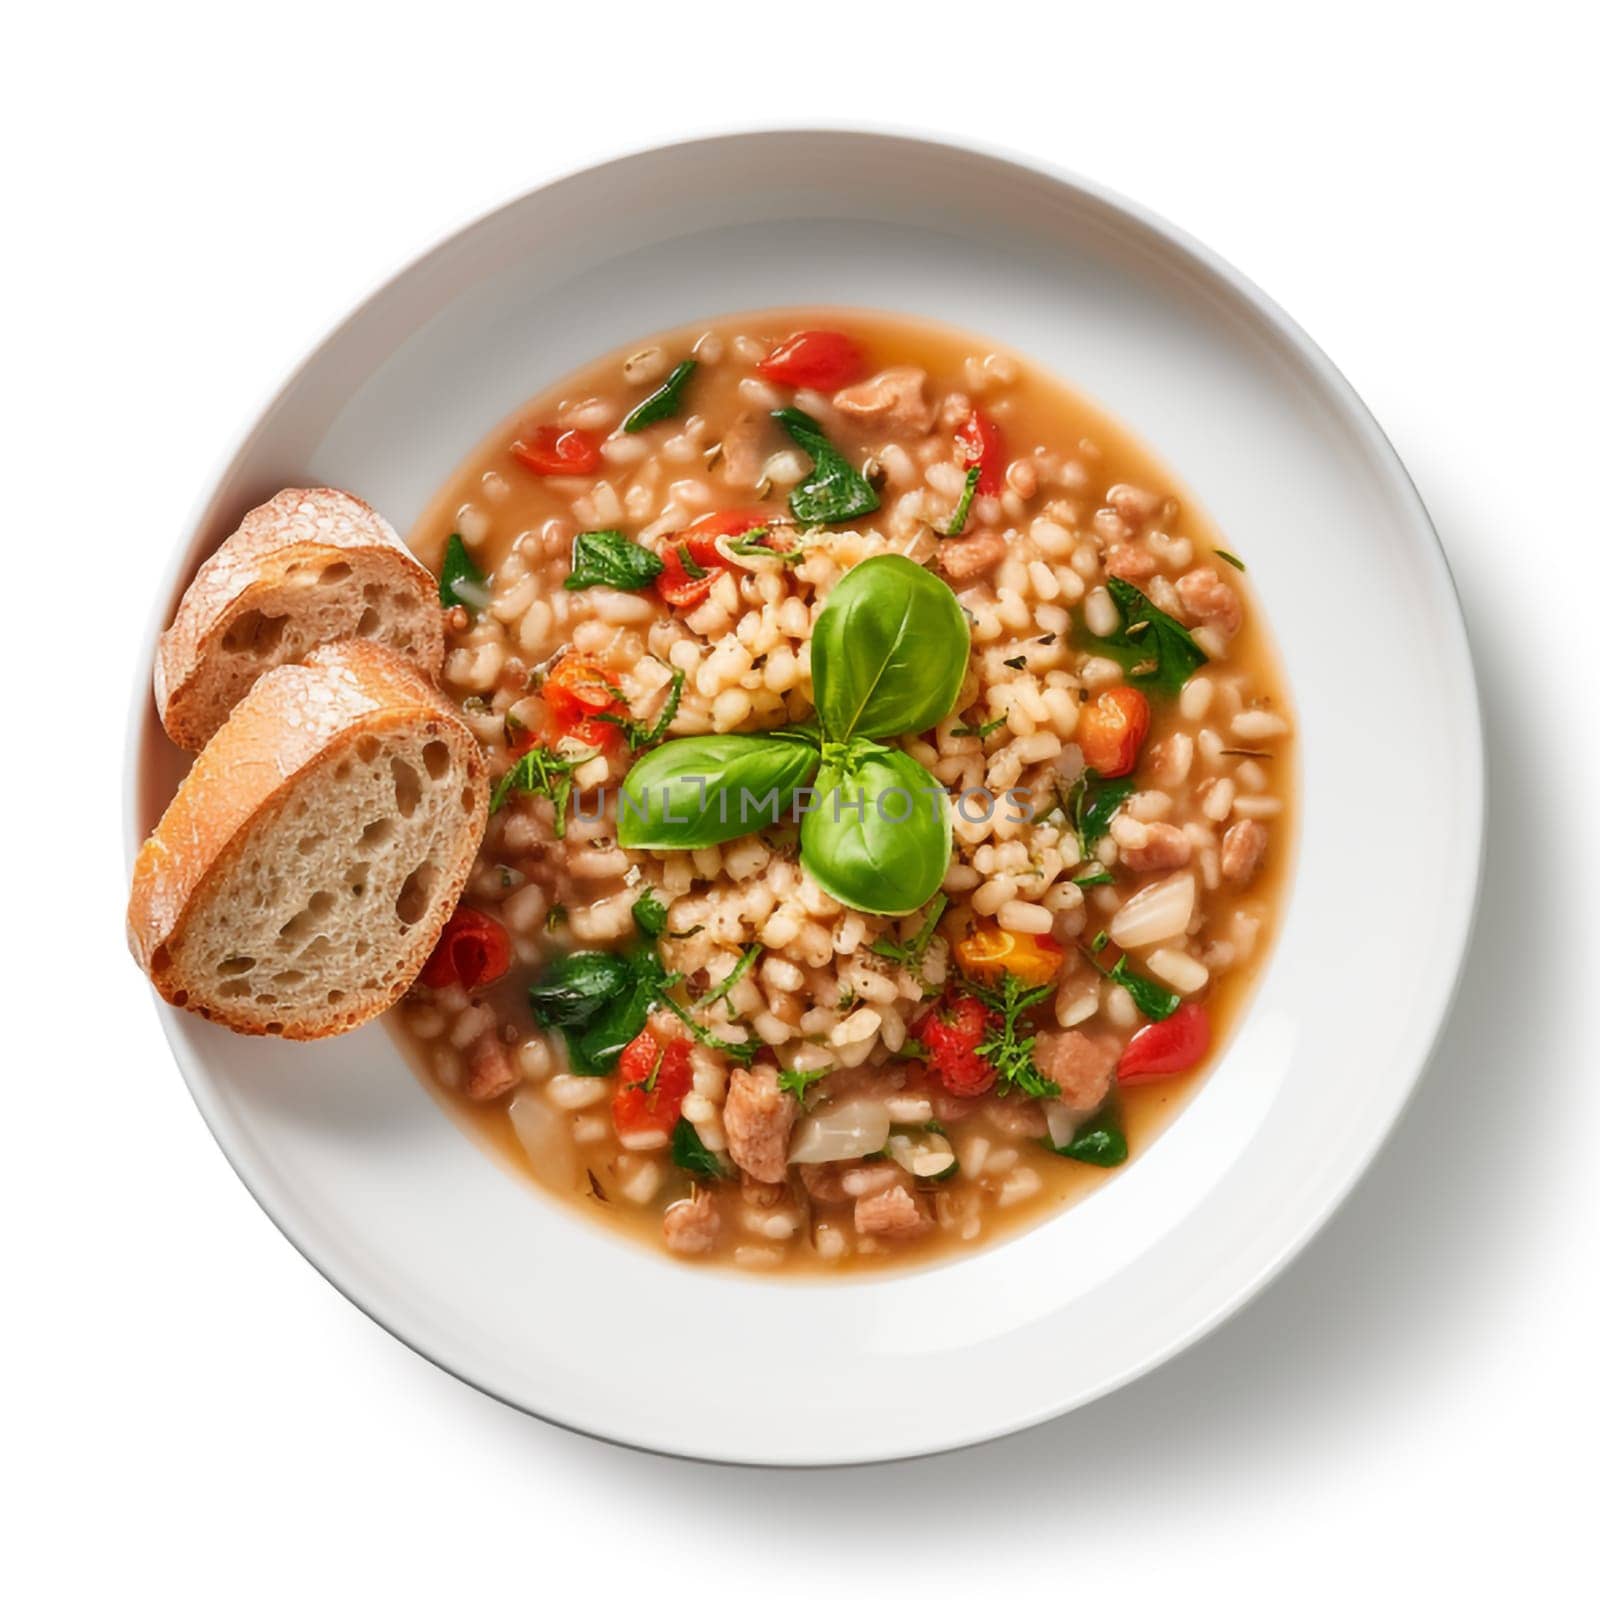 Farro soup a Lazio traditional dish. A hearty and thick soup made with spelt, vegetables. Hearty comfort meal. Italian winter warmer